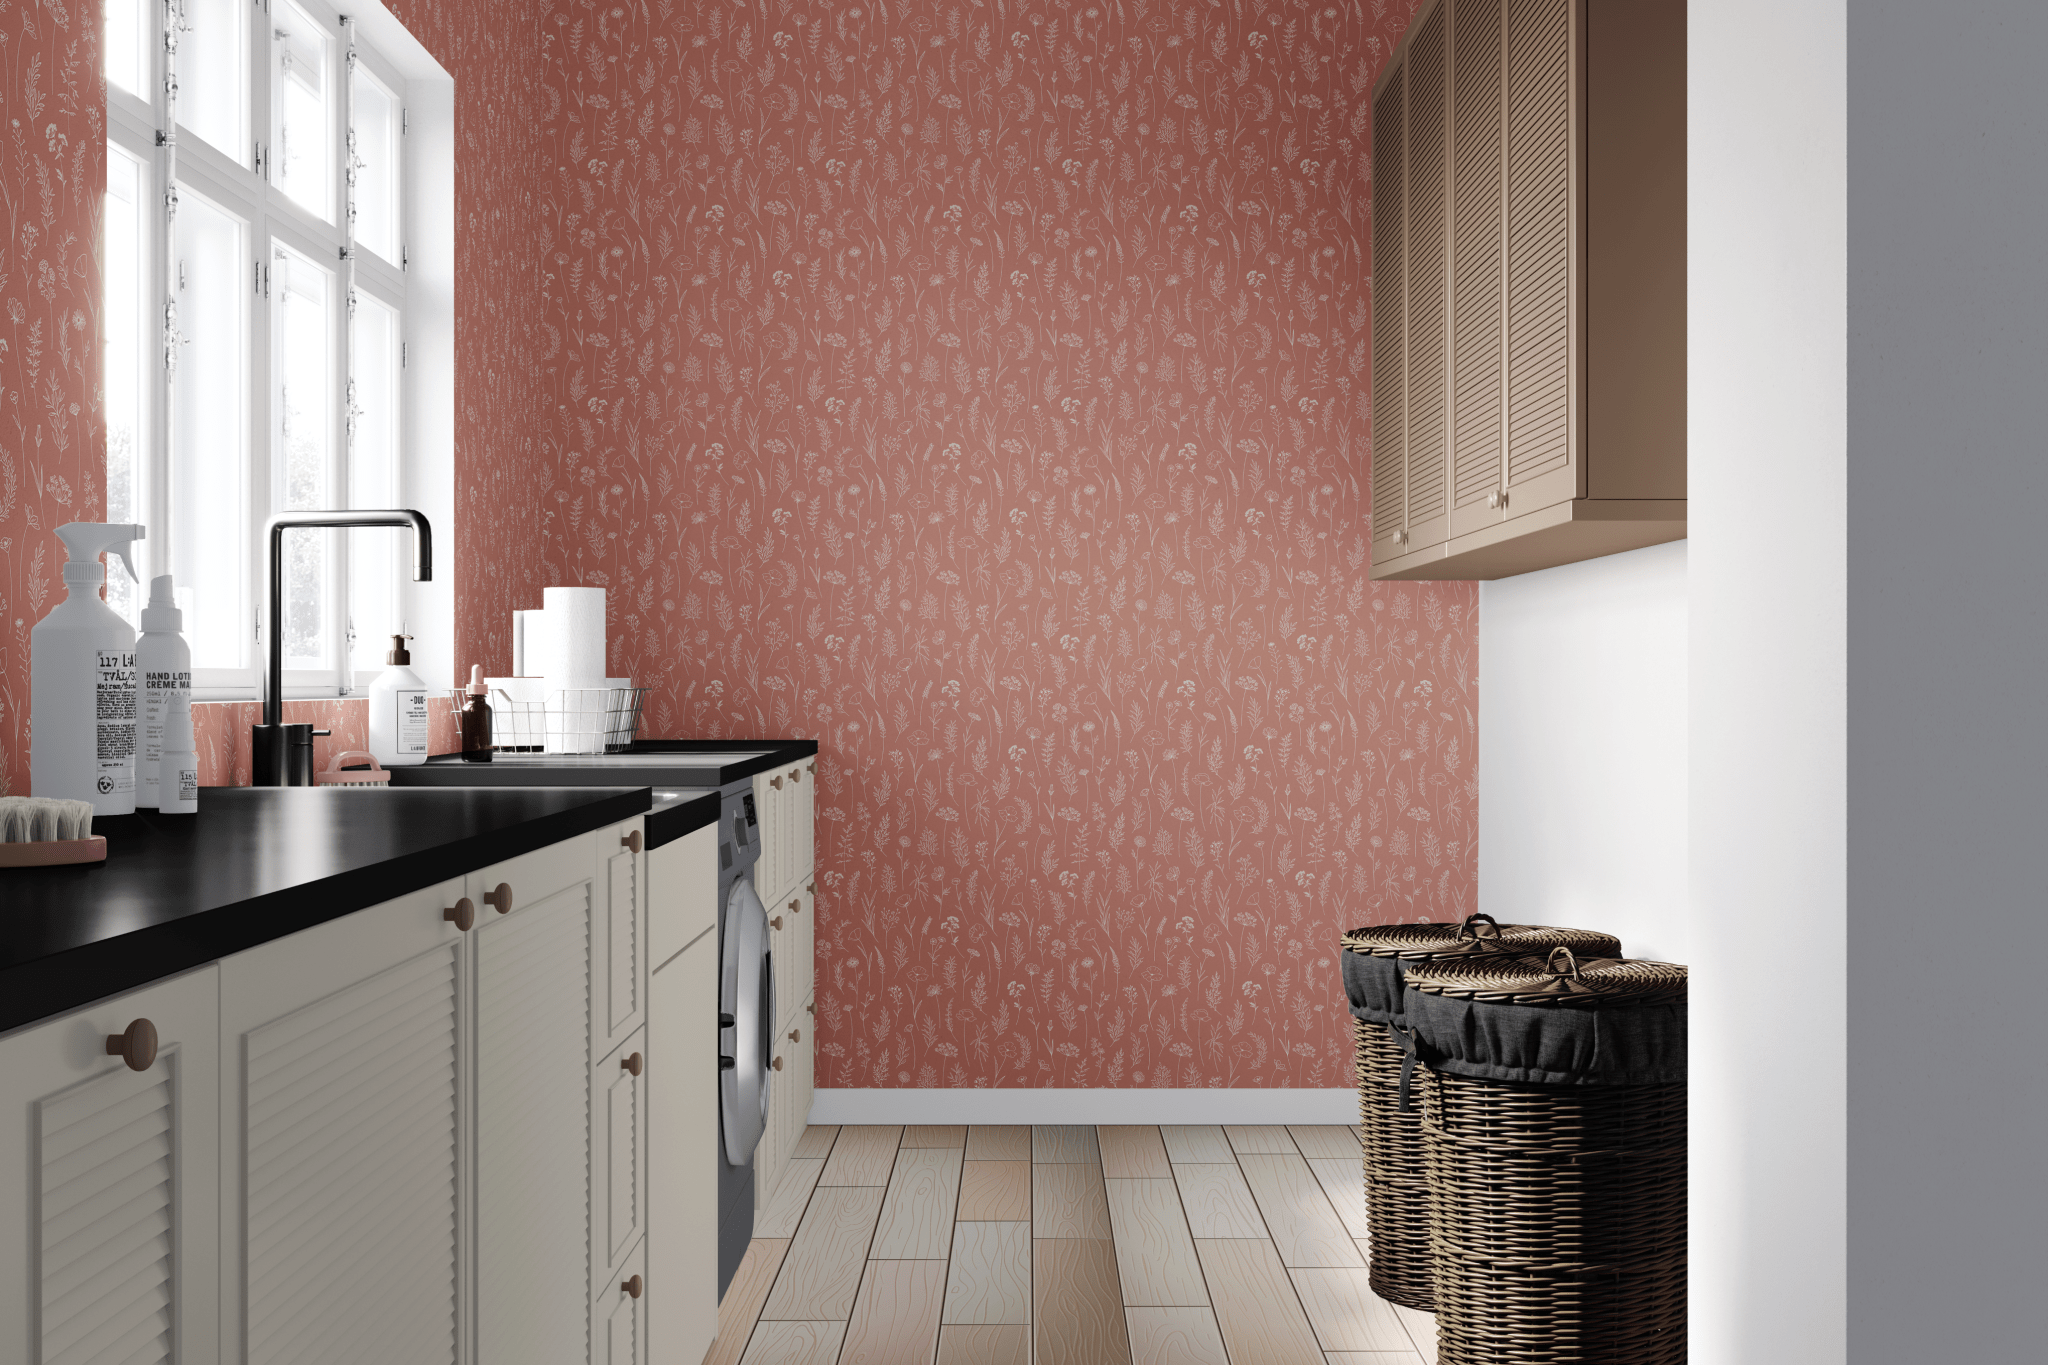 A modern laundry room with a bold terracotta dainty floral wallpaper, contrasting with white cabinets, black countertops, and wicker laundry baskets.